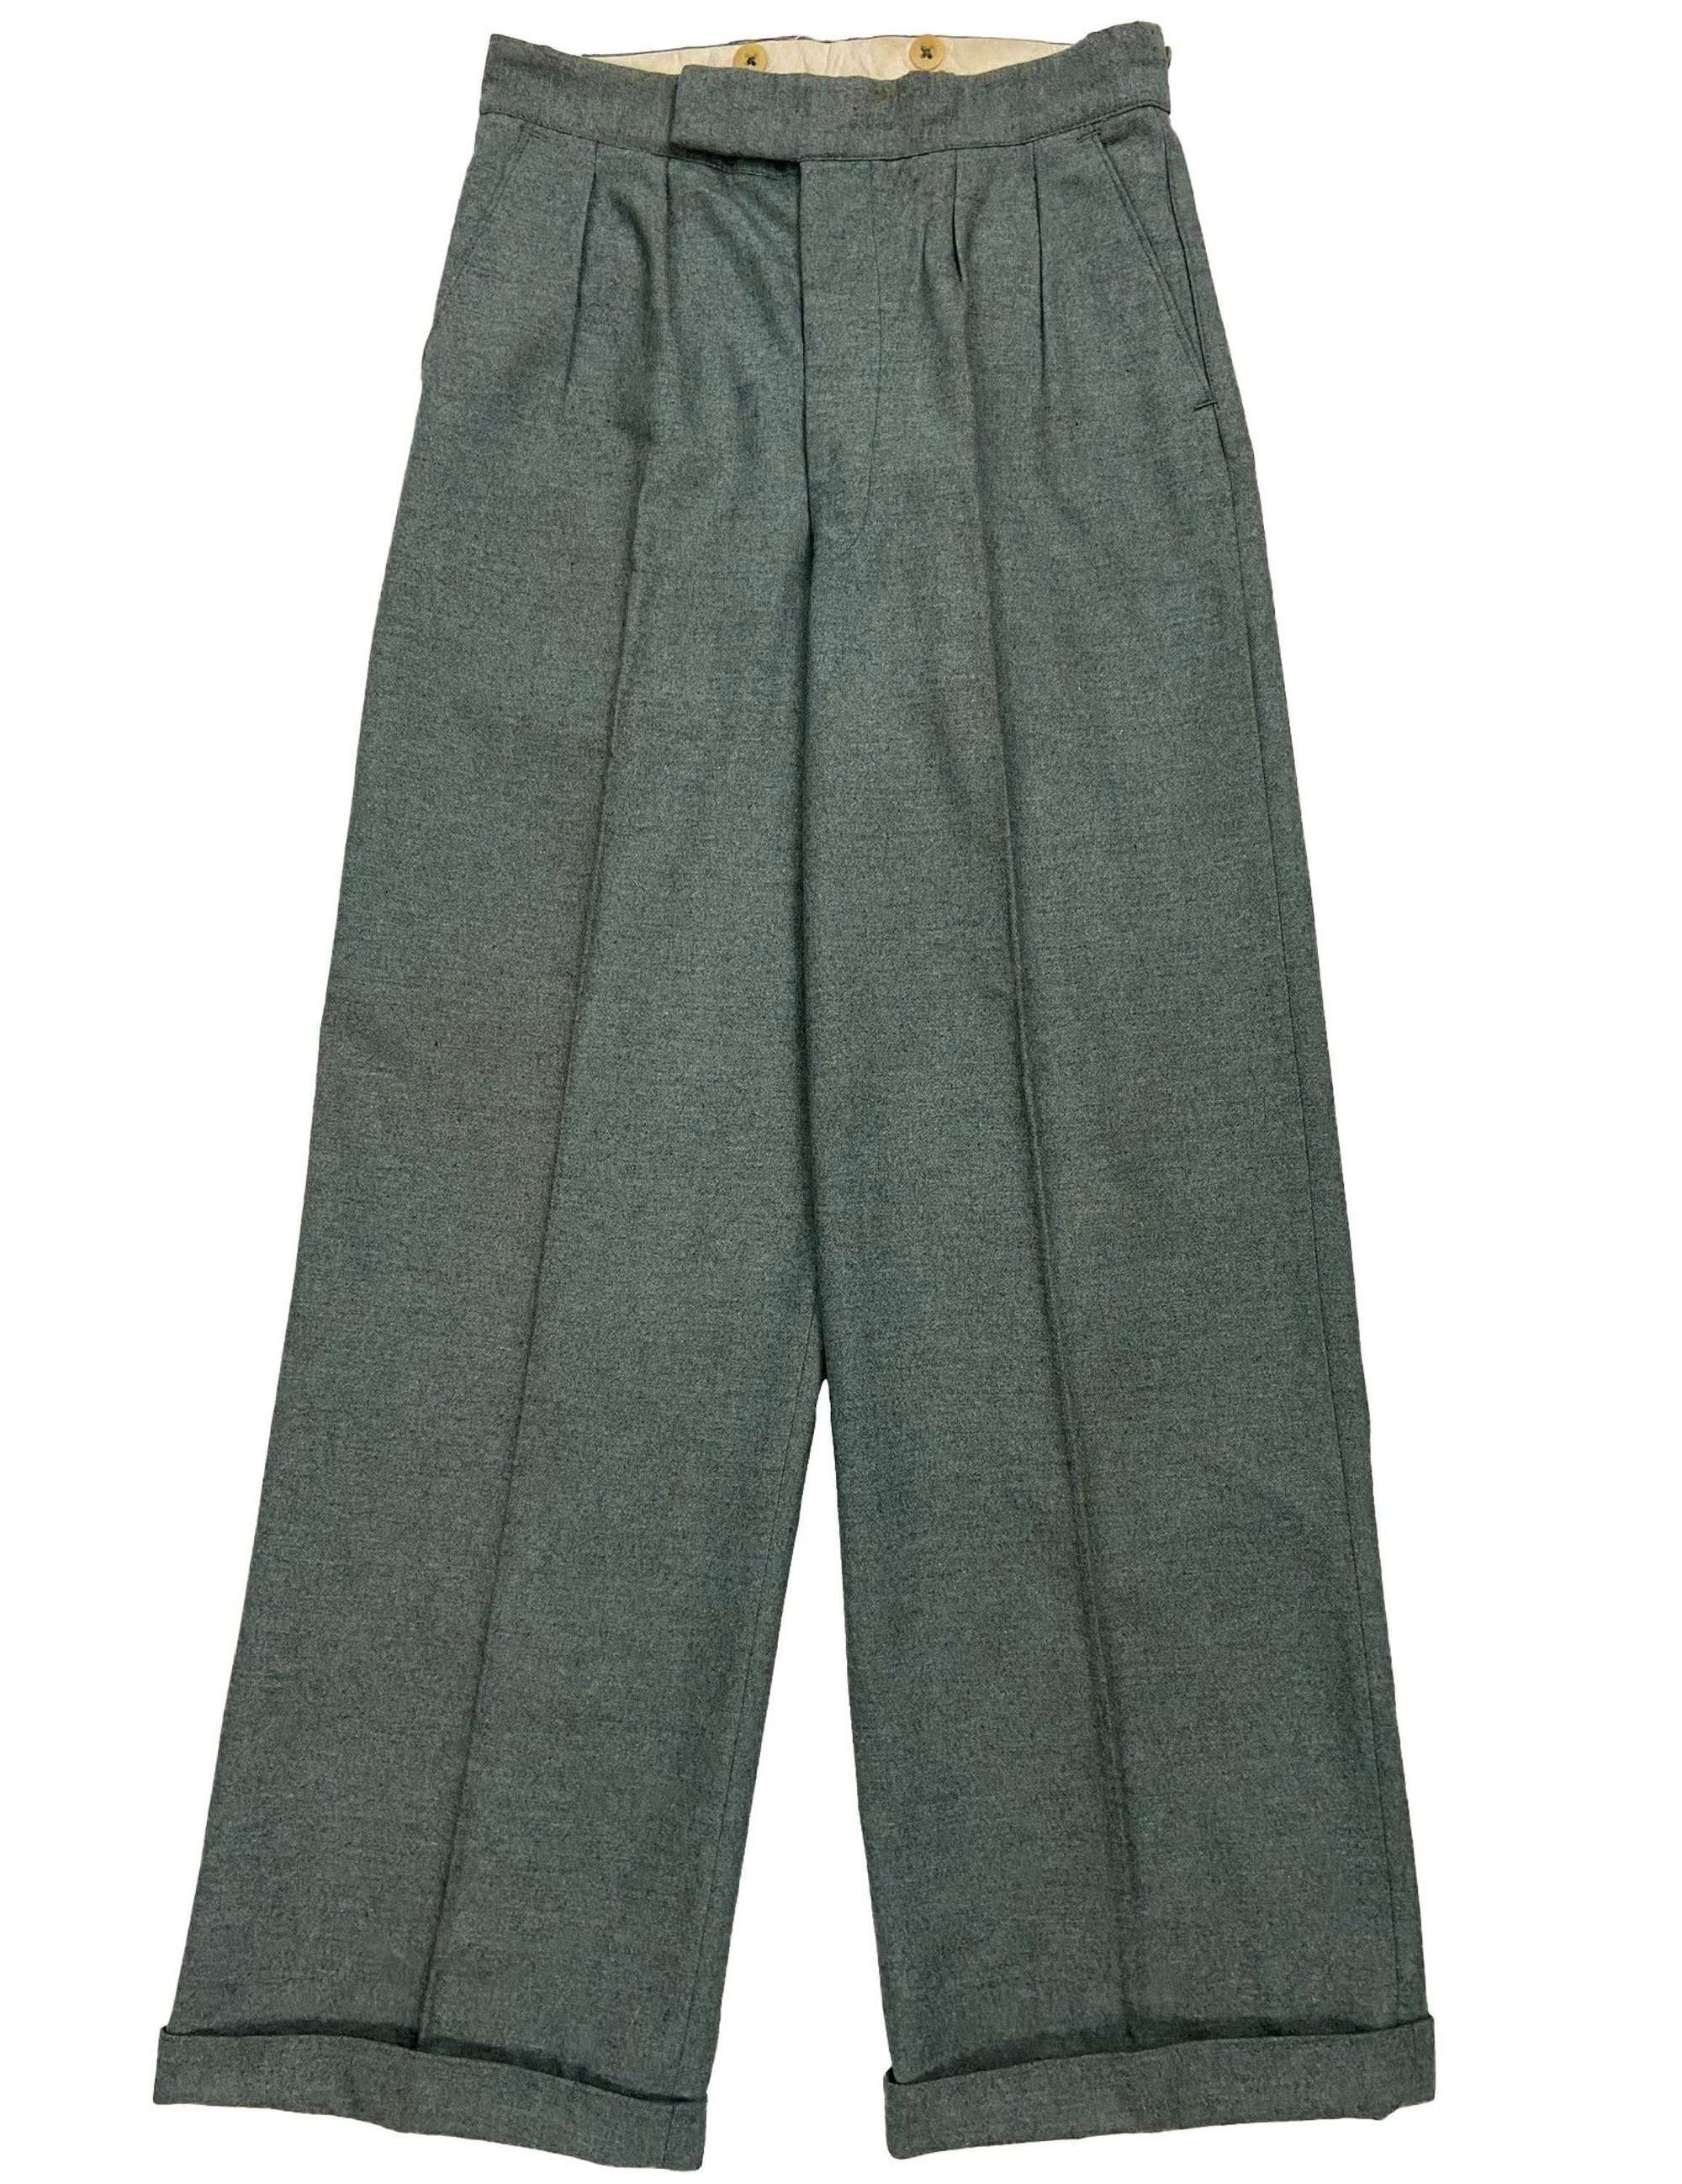 Rare 1940s CC41 Teal Grey Men's Flannel Trousers